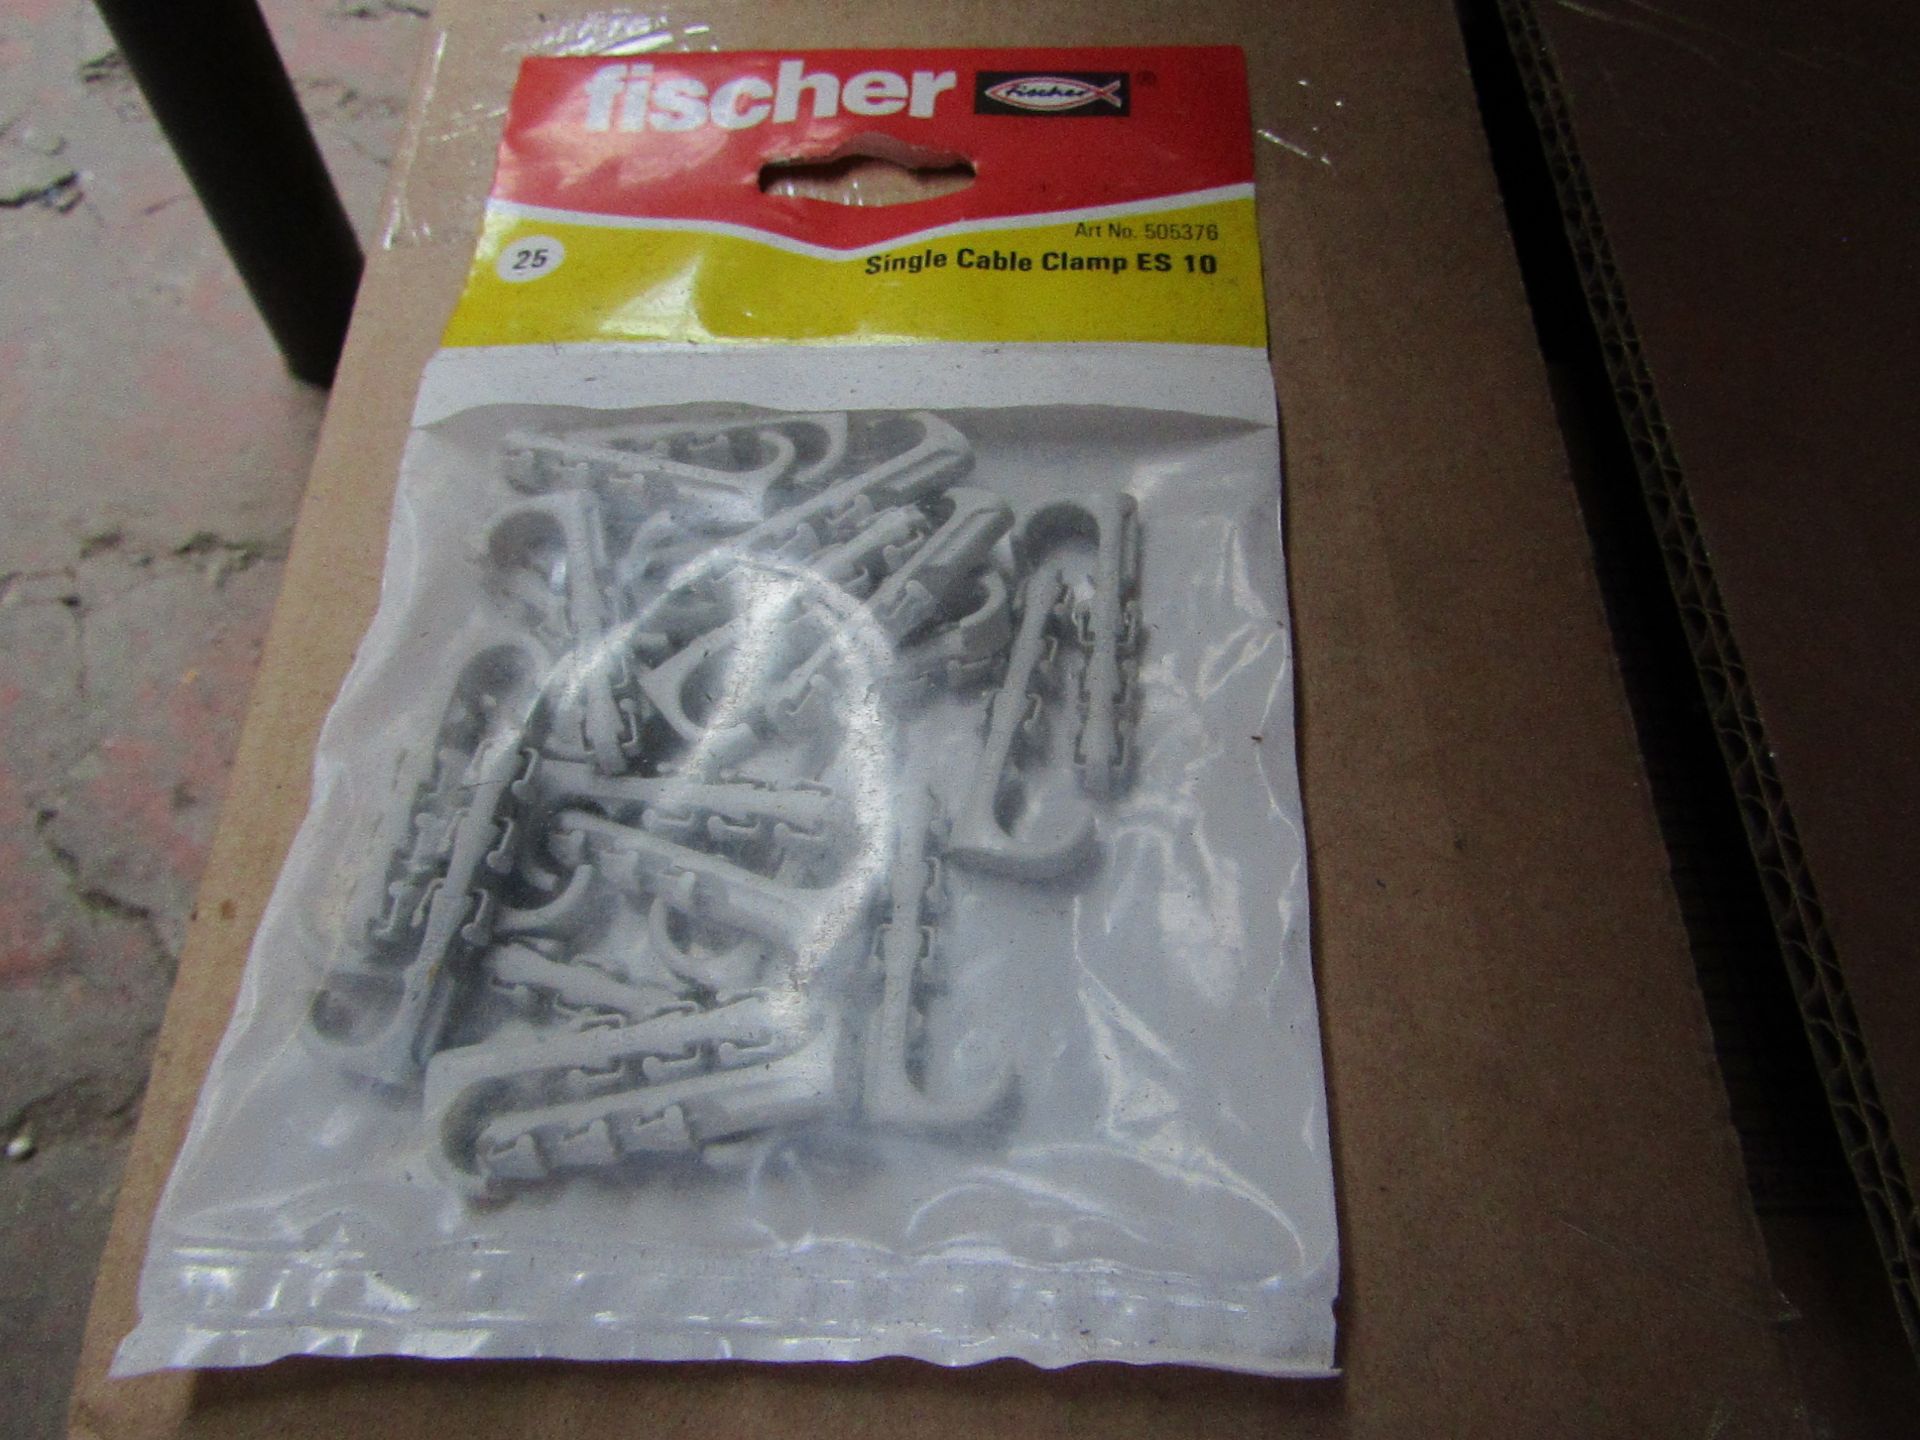 5x Fischer - Single Cable Clamp ES 10 - (Packs of 25) - New & Packaged.